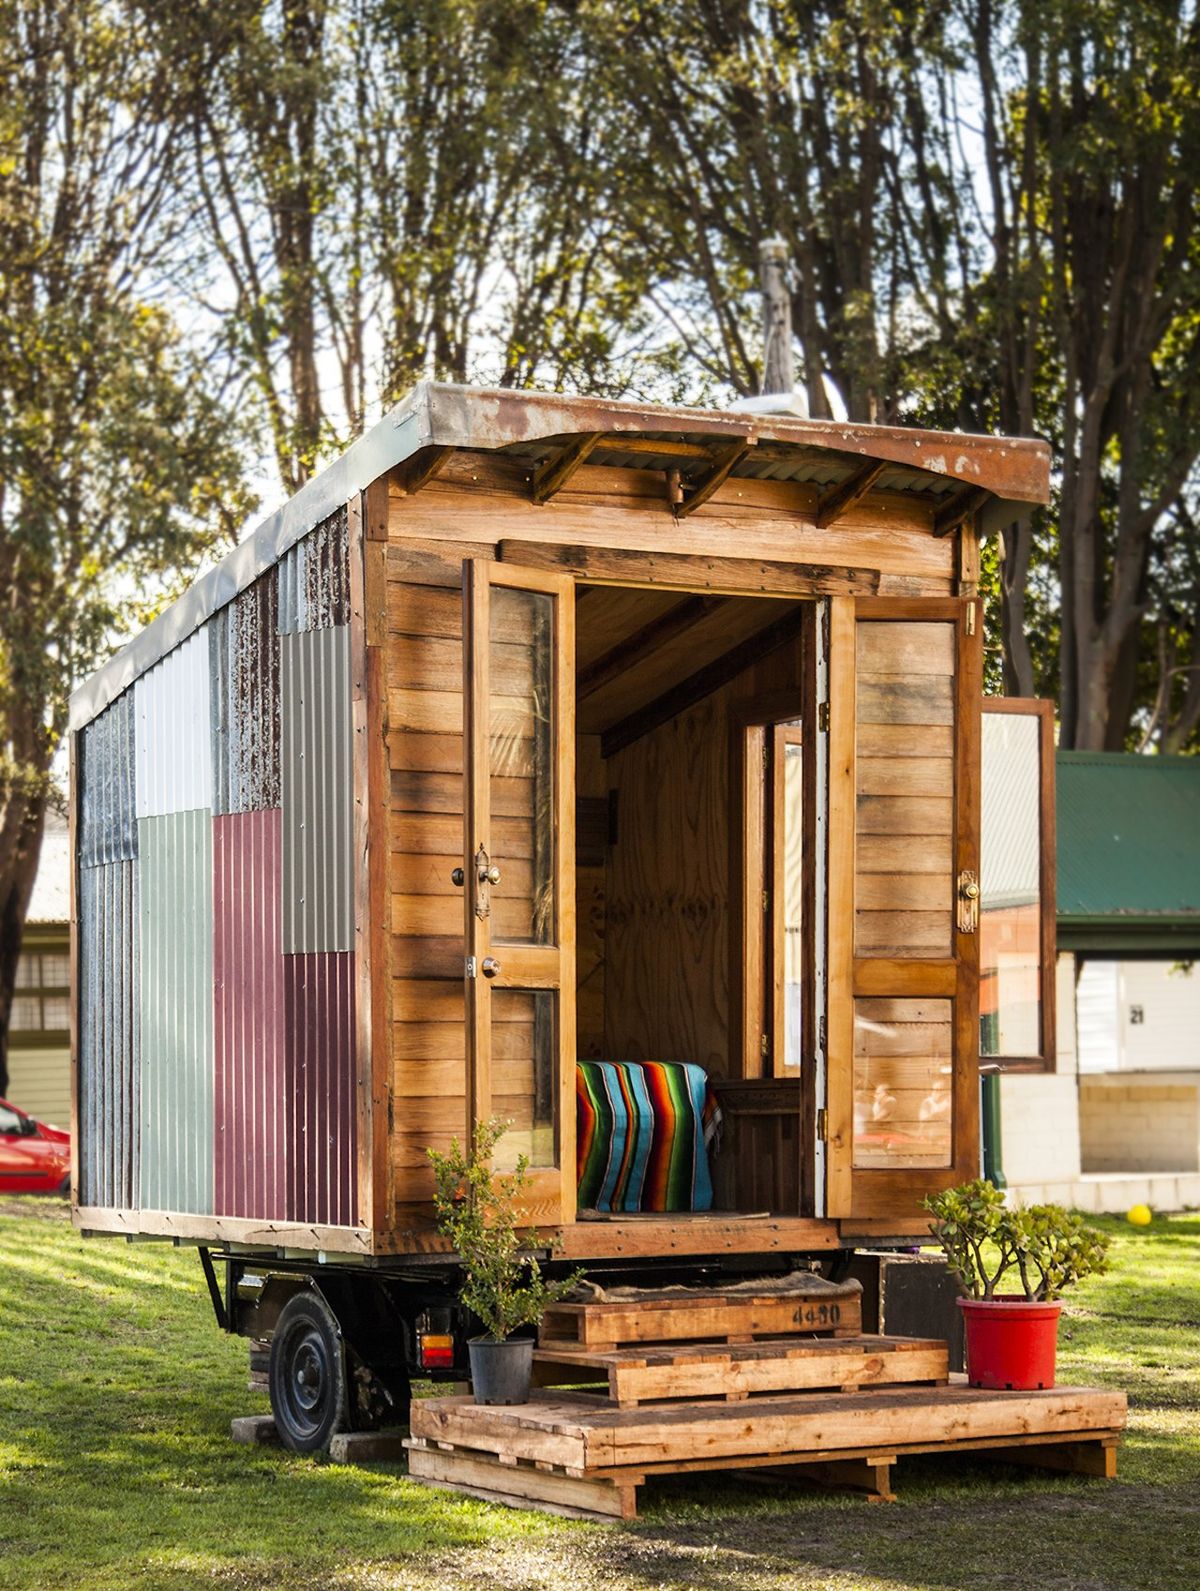 Tiny house using recycled materials